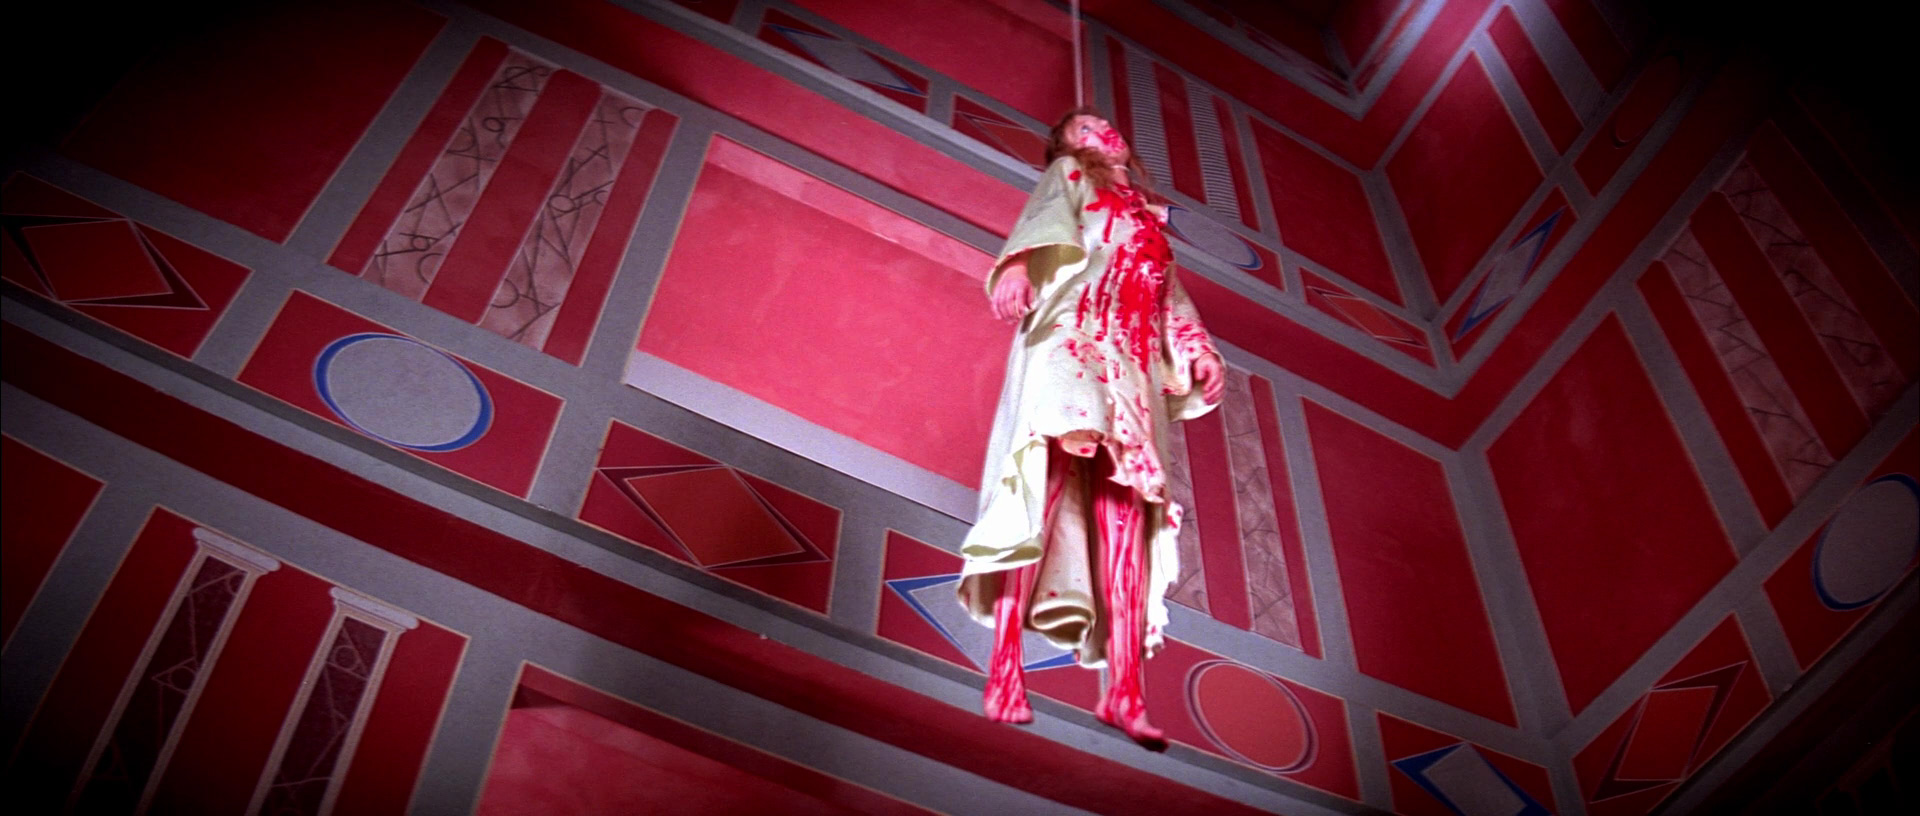 This is a still from Suspiria (1977).